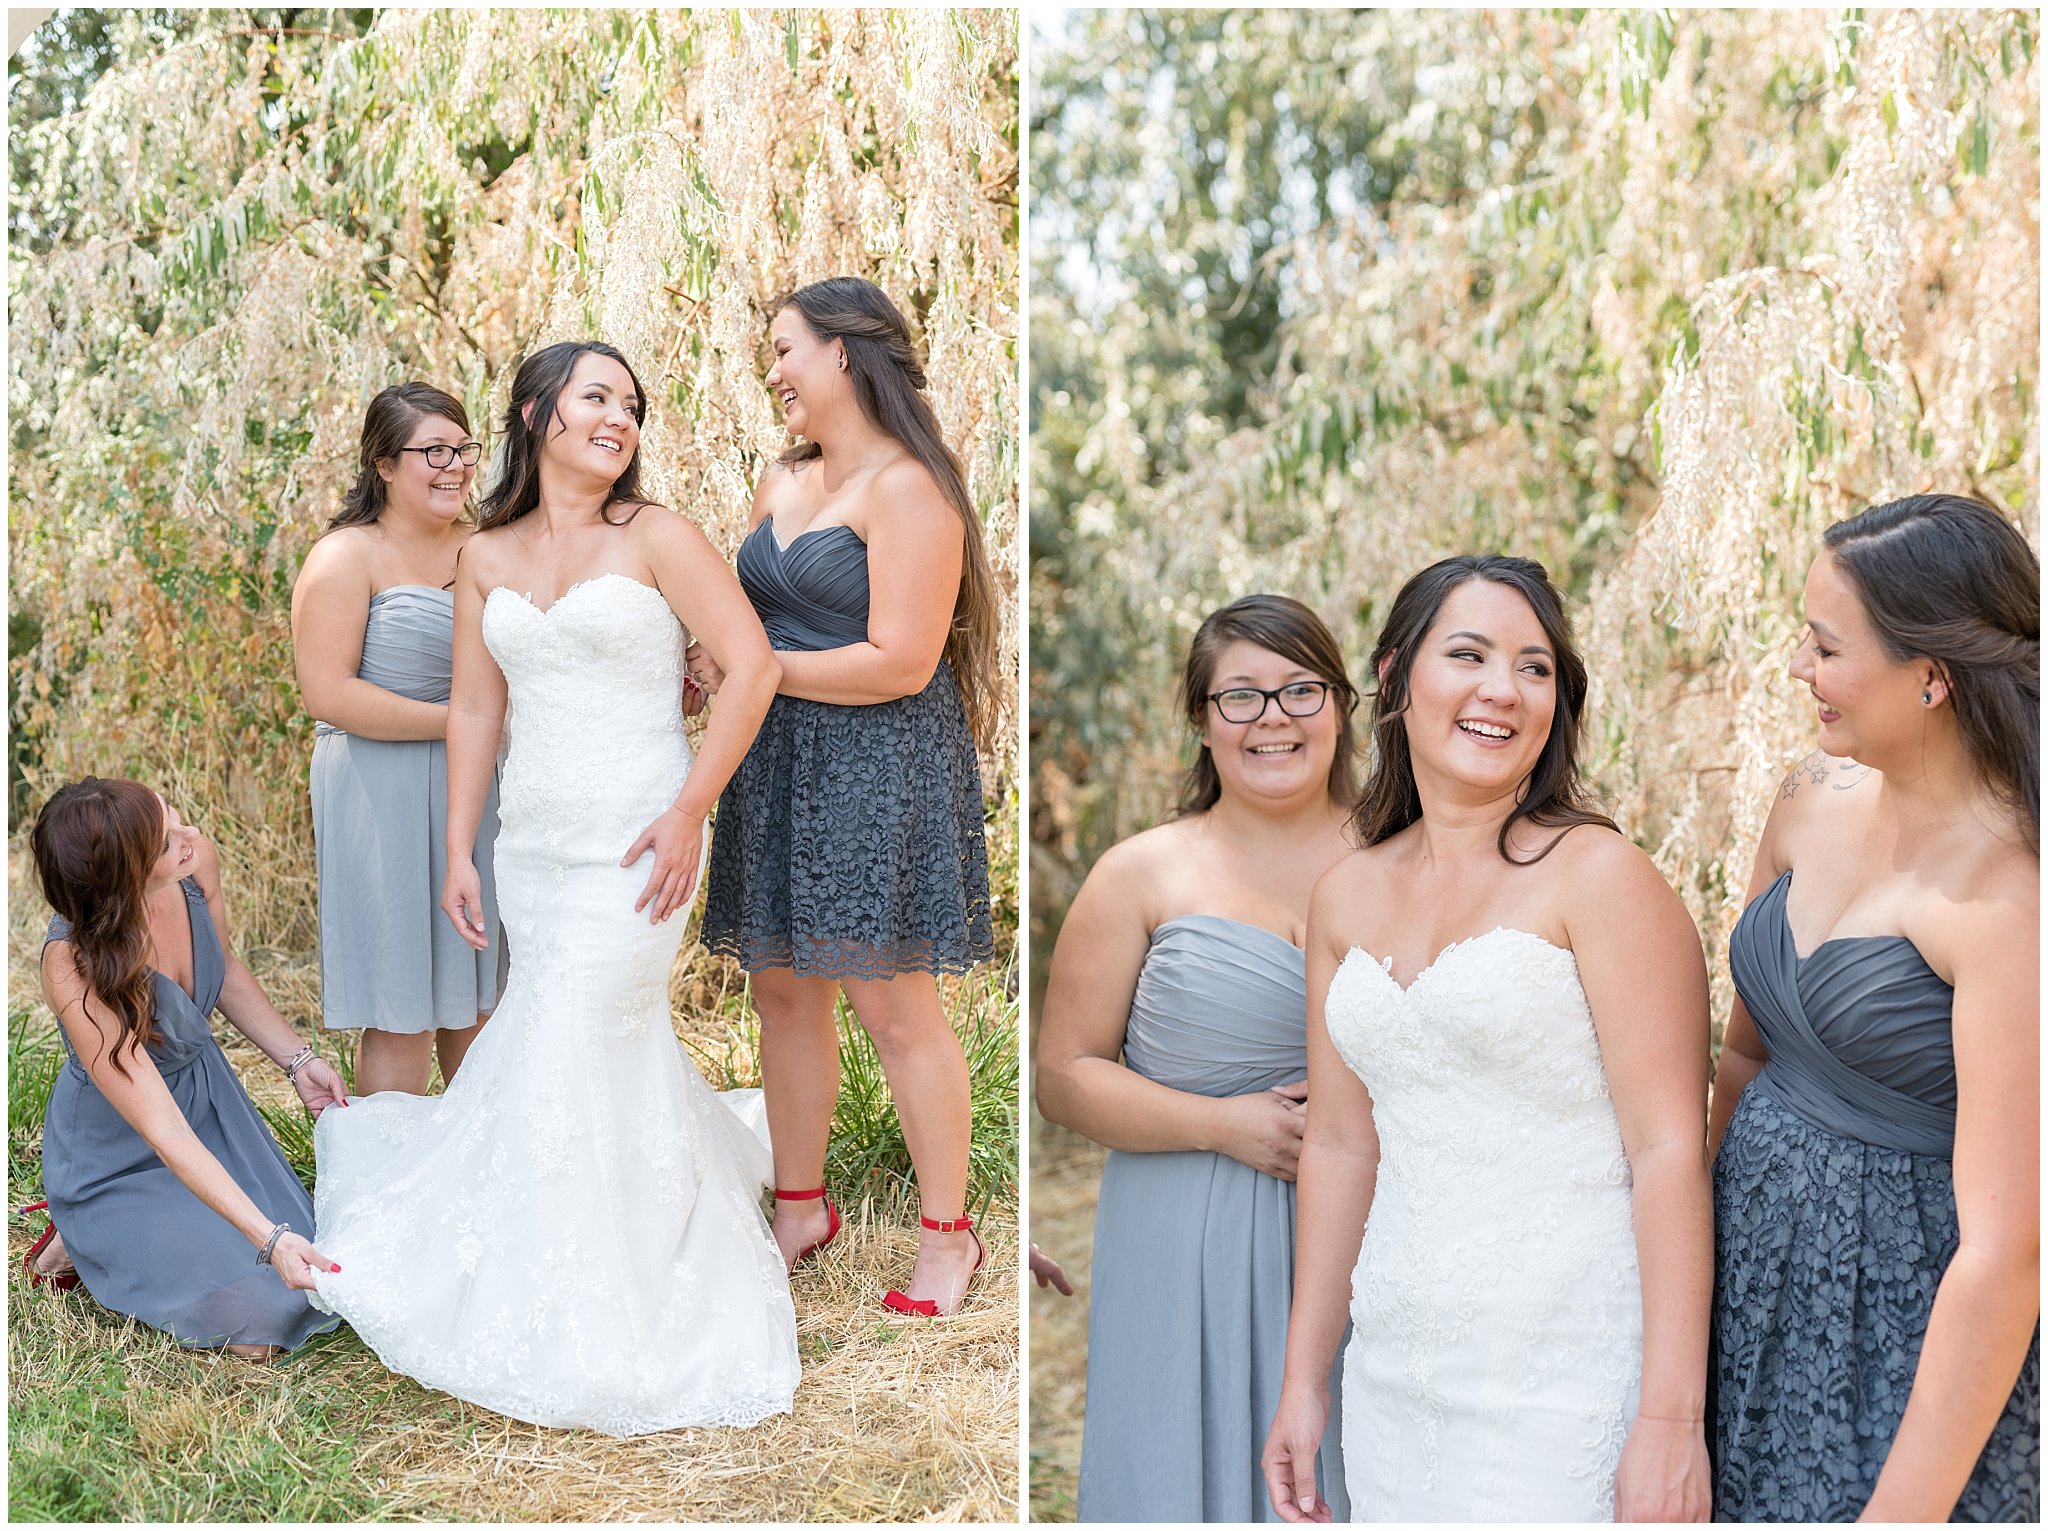 Bridesmaids helping bride get ready and put on her dress | Davis County Outdoor Wedding | Jessie and Dallin Photography